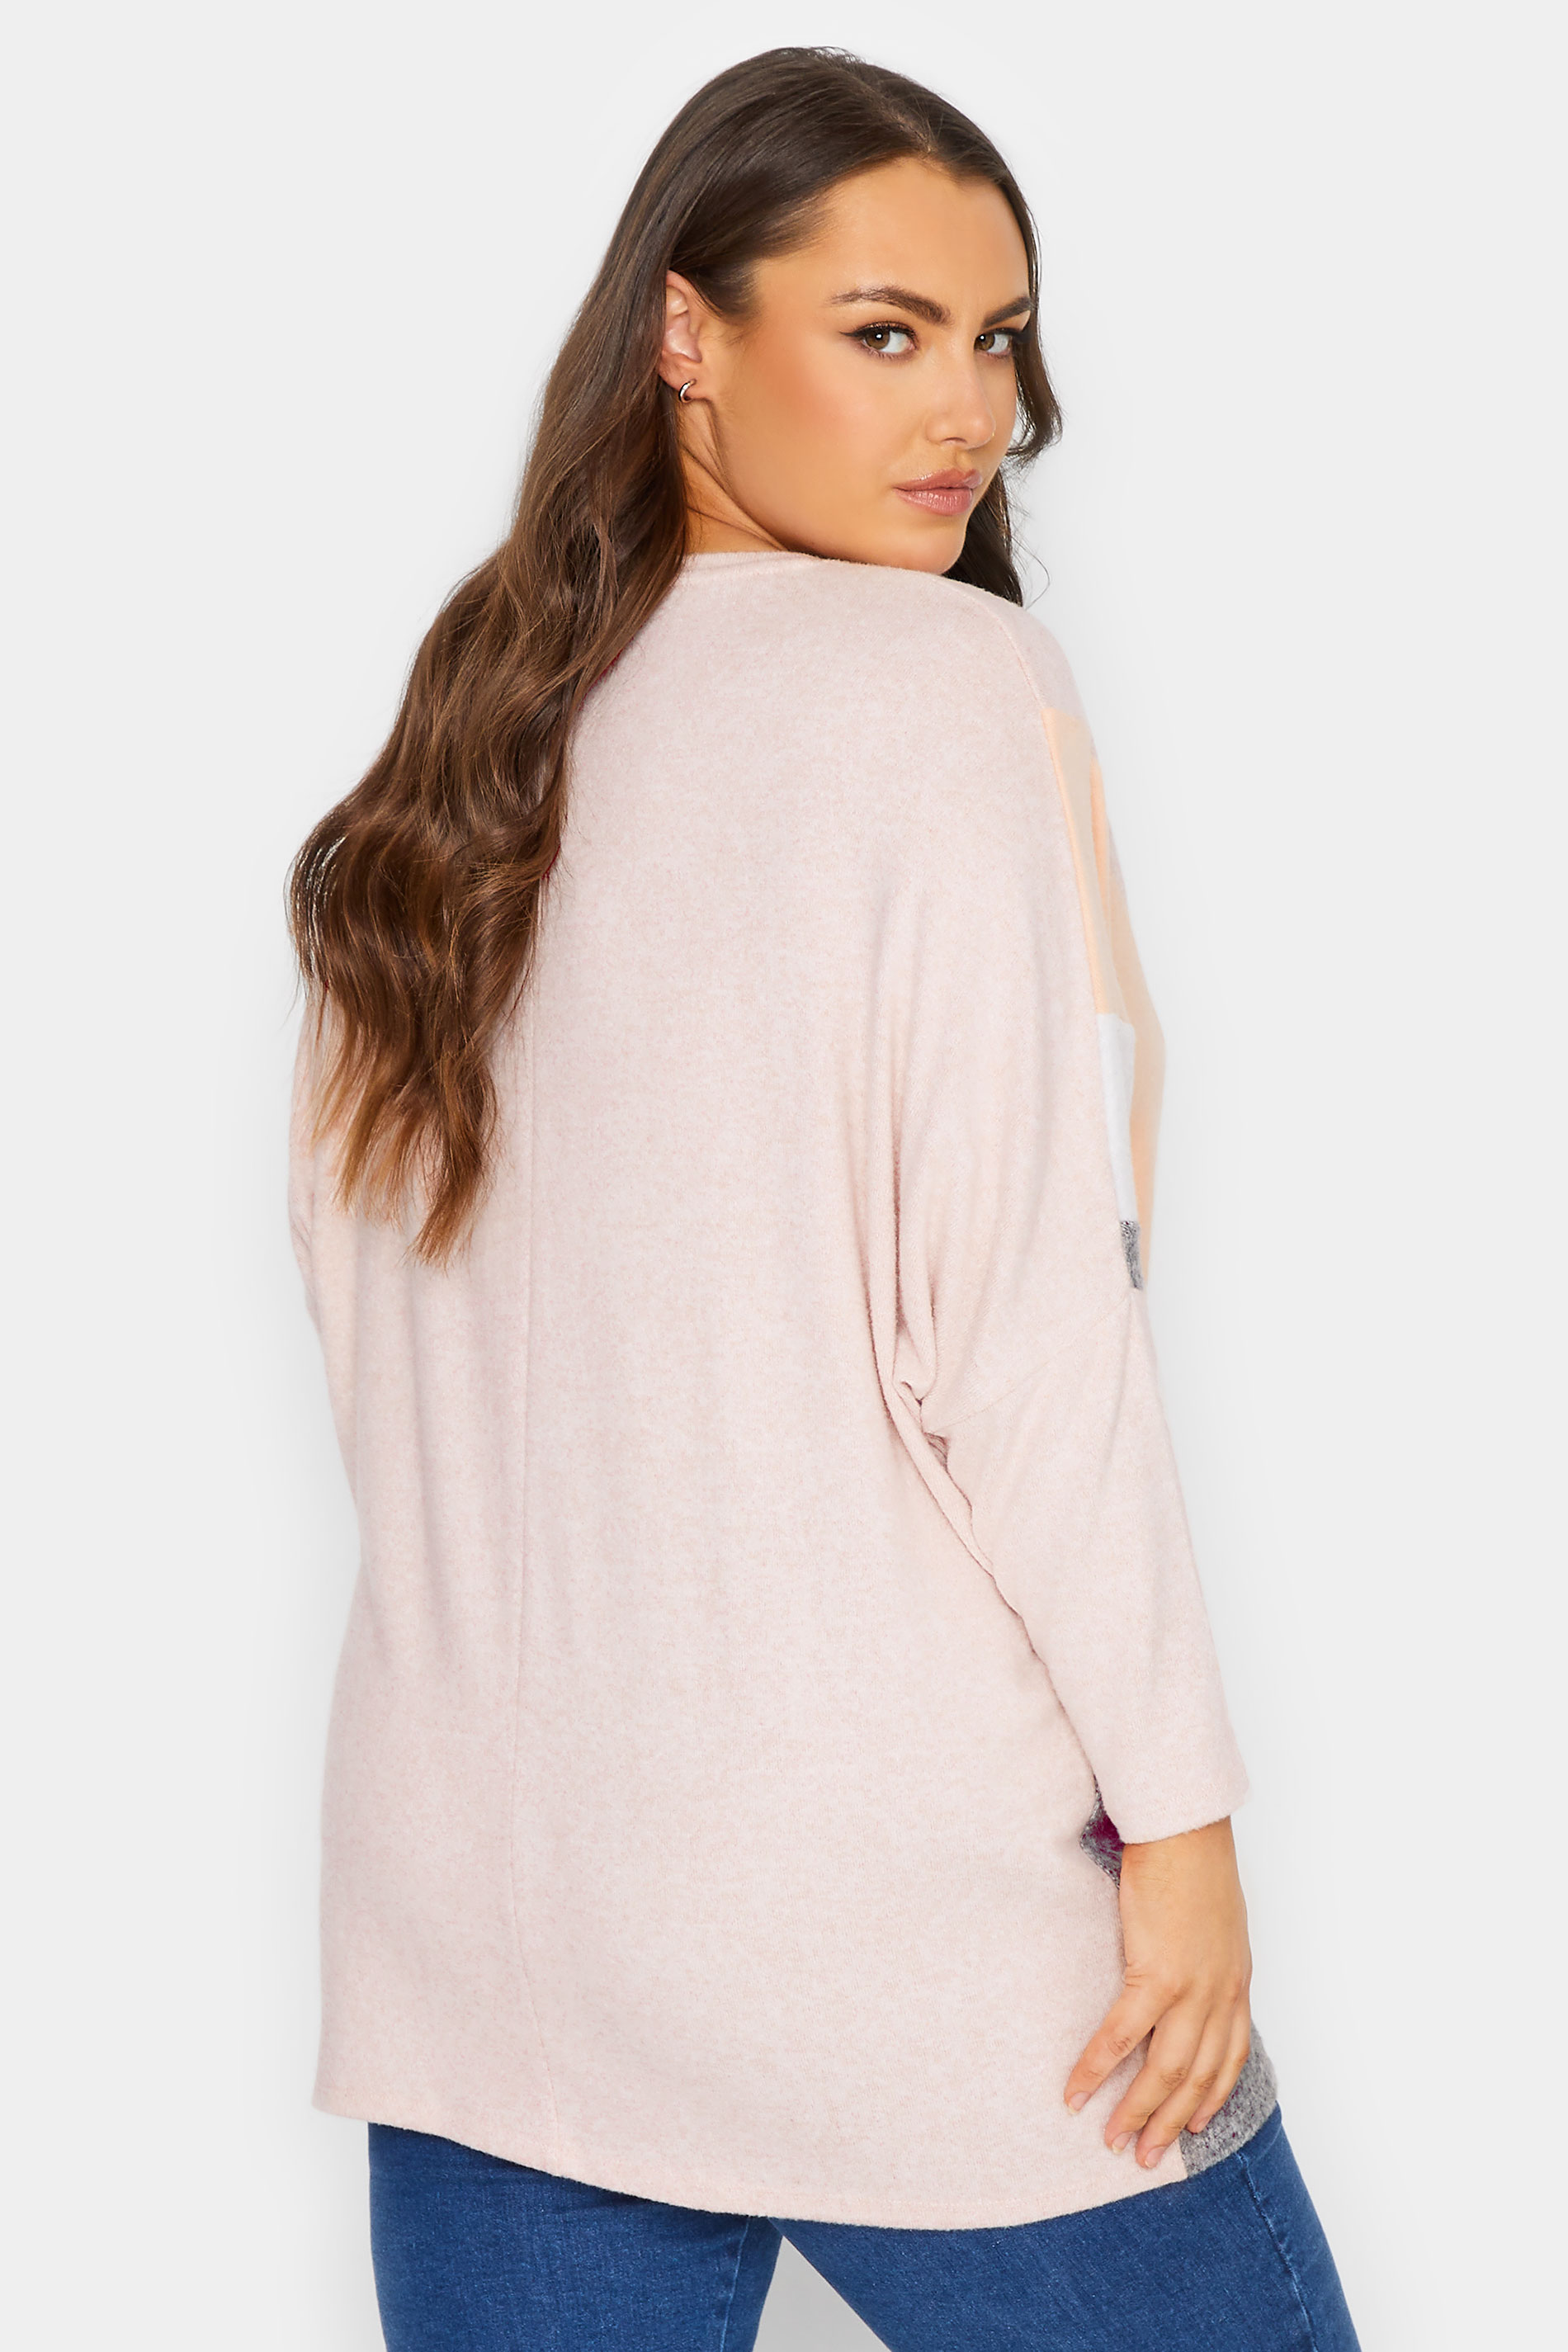 Plus Size Grey & Pink Colour Block Soft Touch Sweatshirt | Yours Clothing 3